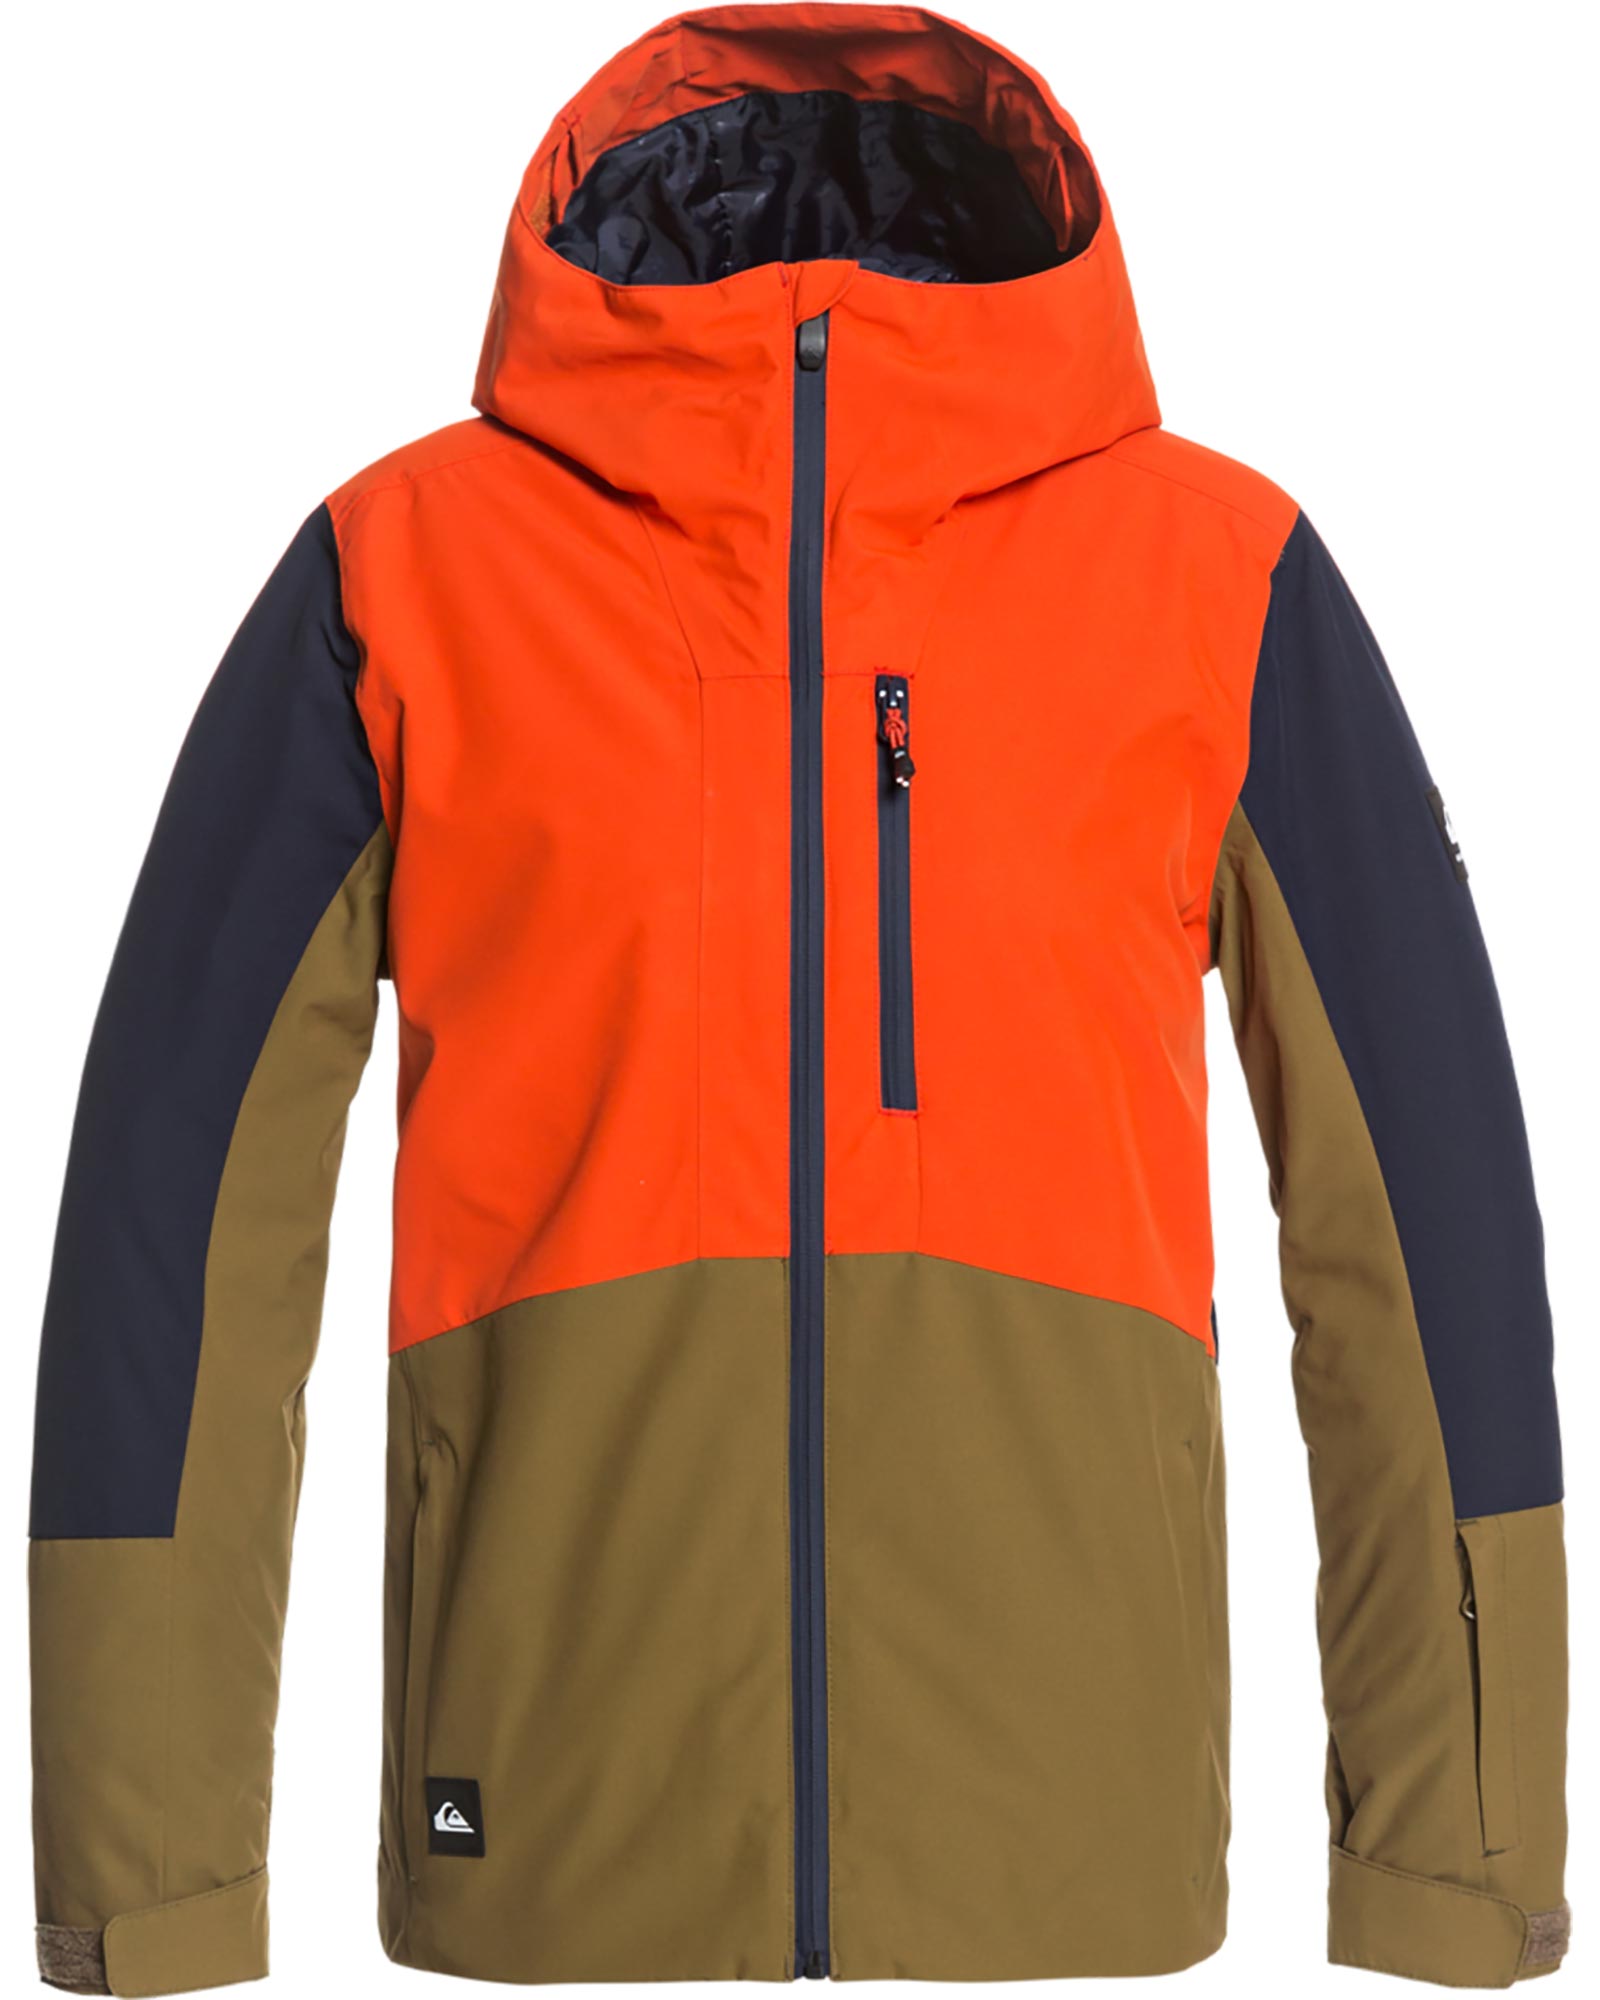 Product image of Quiksilver Ambition Boys' Jacket